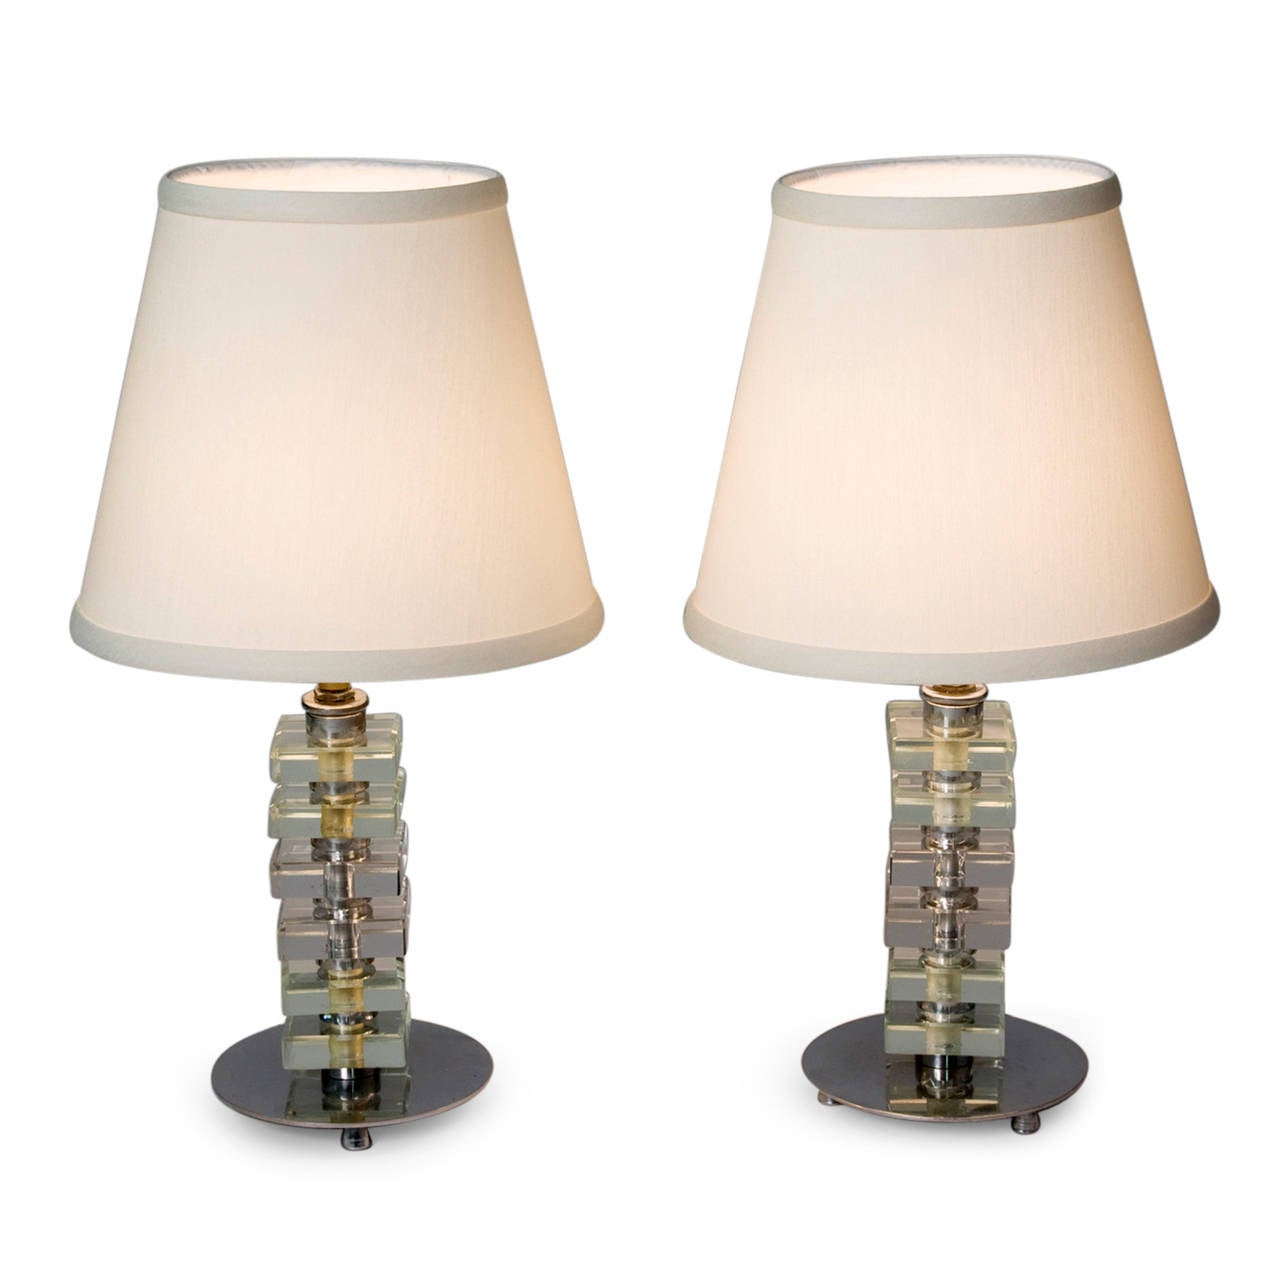 Pair of stacked glass boudoir lamps, the square glass elements separated by nickeled bronze discs, and resting on a larger nickeled bronze base having four feet, in custom silk shades, in the style of Jacques Adnet, French 1930s. Overall height 15